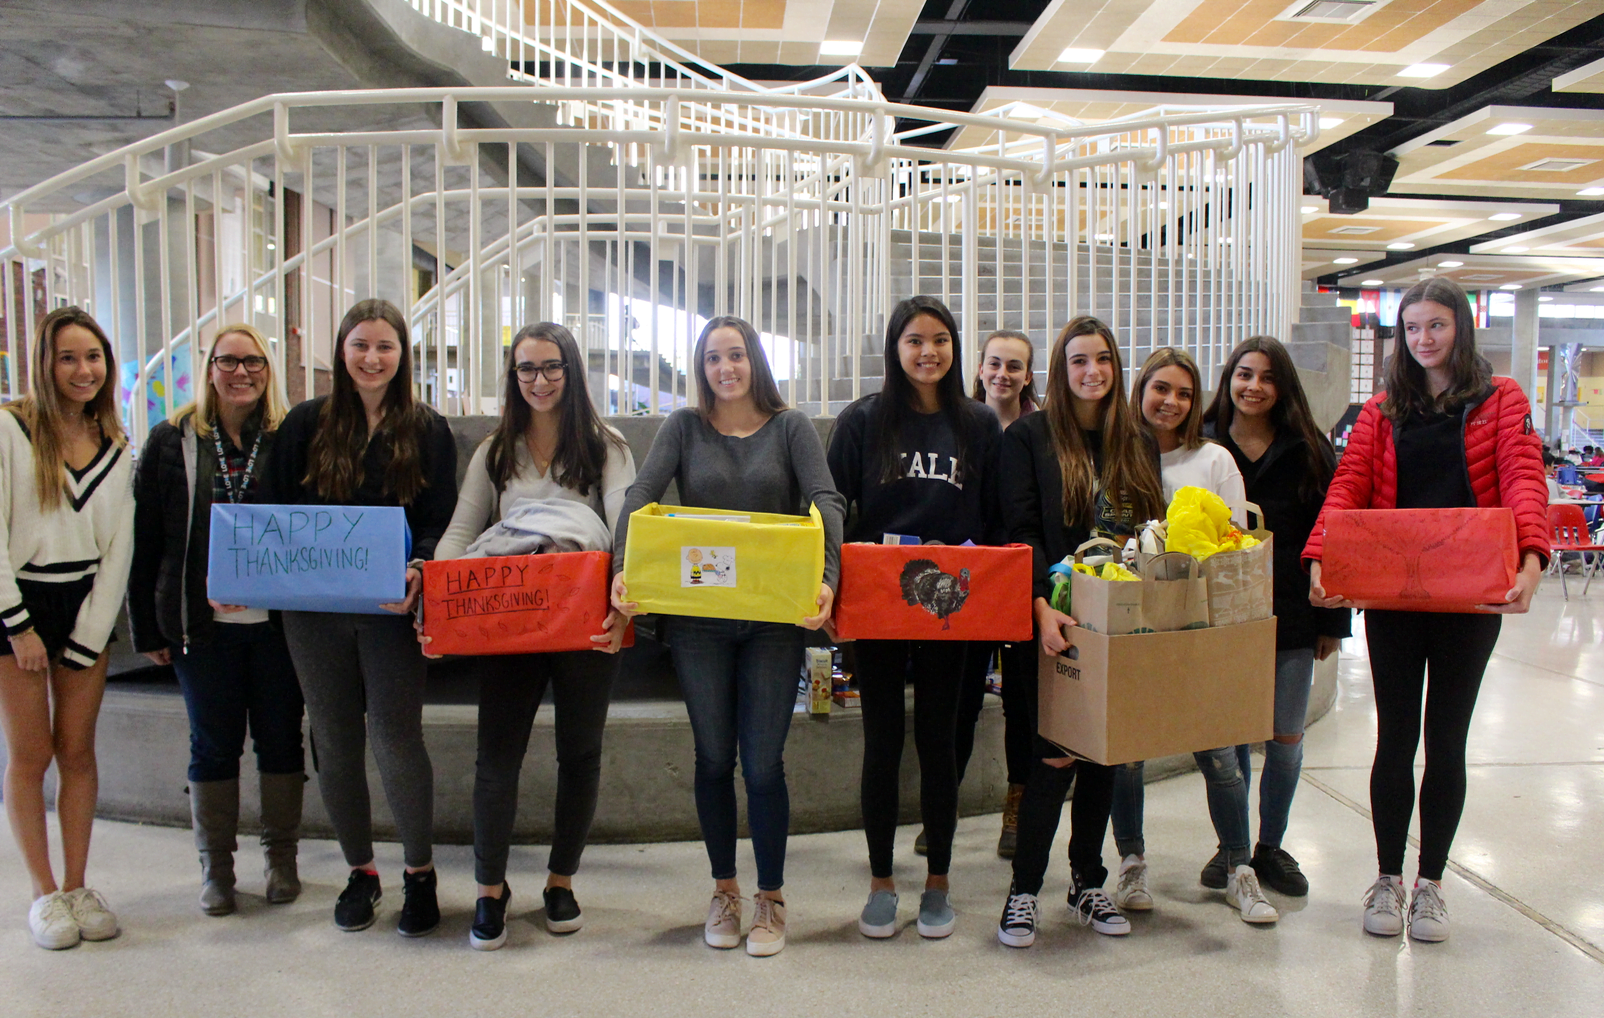 Students of Kathleen Mendez prepared to carry full boxes of Thanksgiving meal fixings from the student center to the south loading dock. Nov 20, 2017 Photo: Leslie Yager